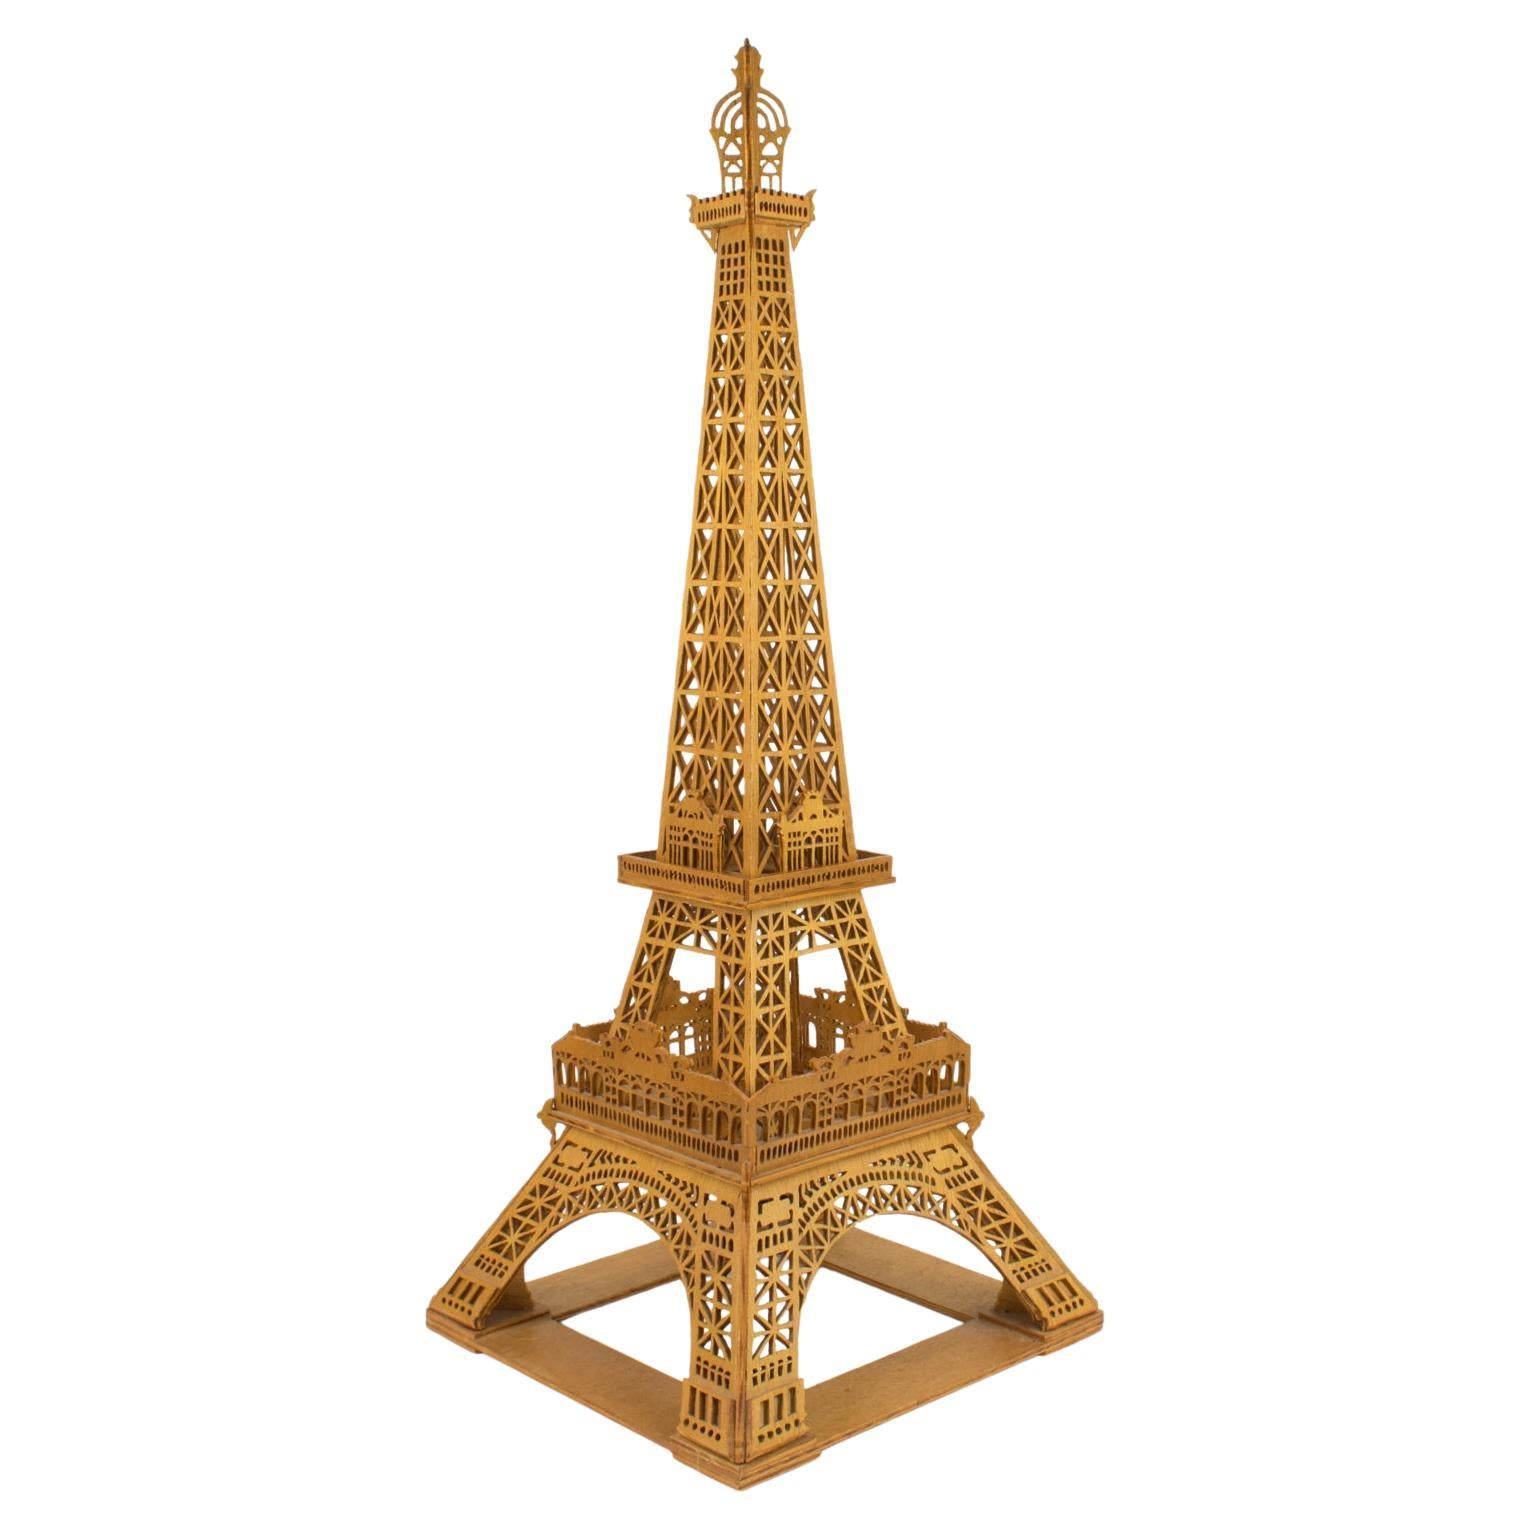 French Hand-Carved Wooden Eiffel Tower Model Miniature Sculpture